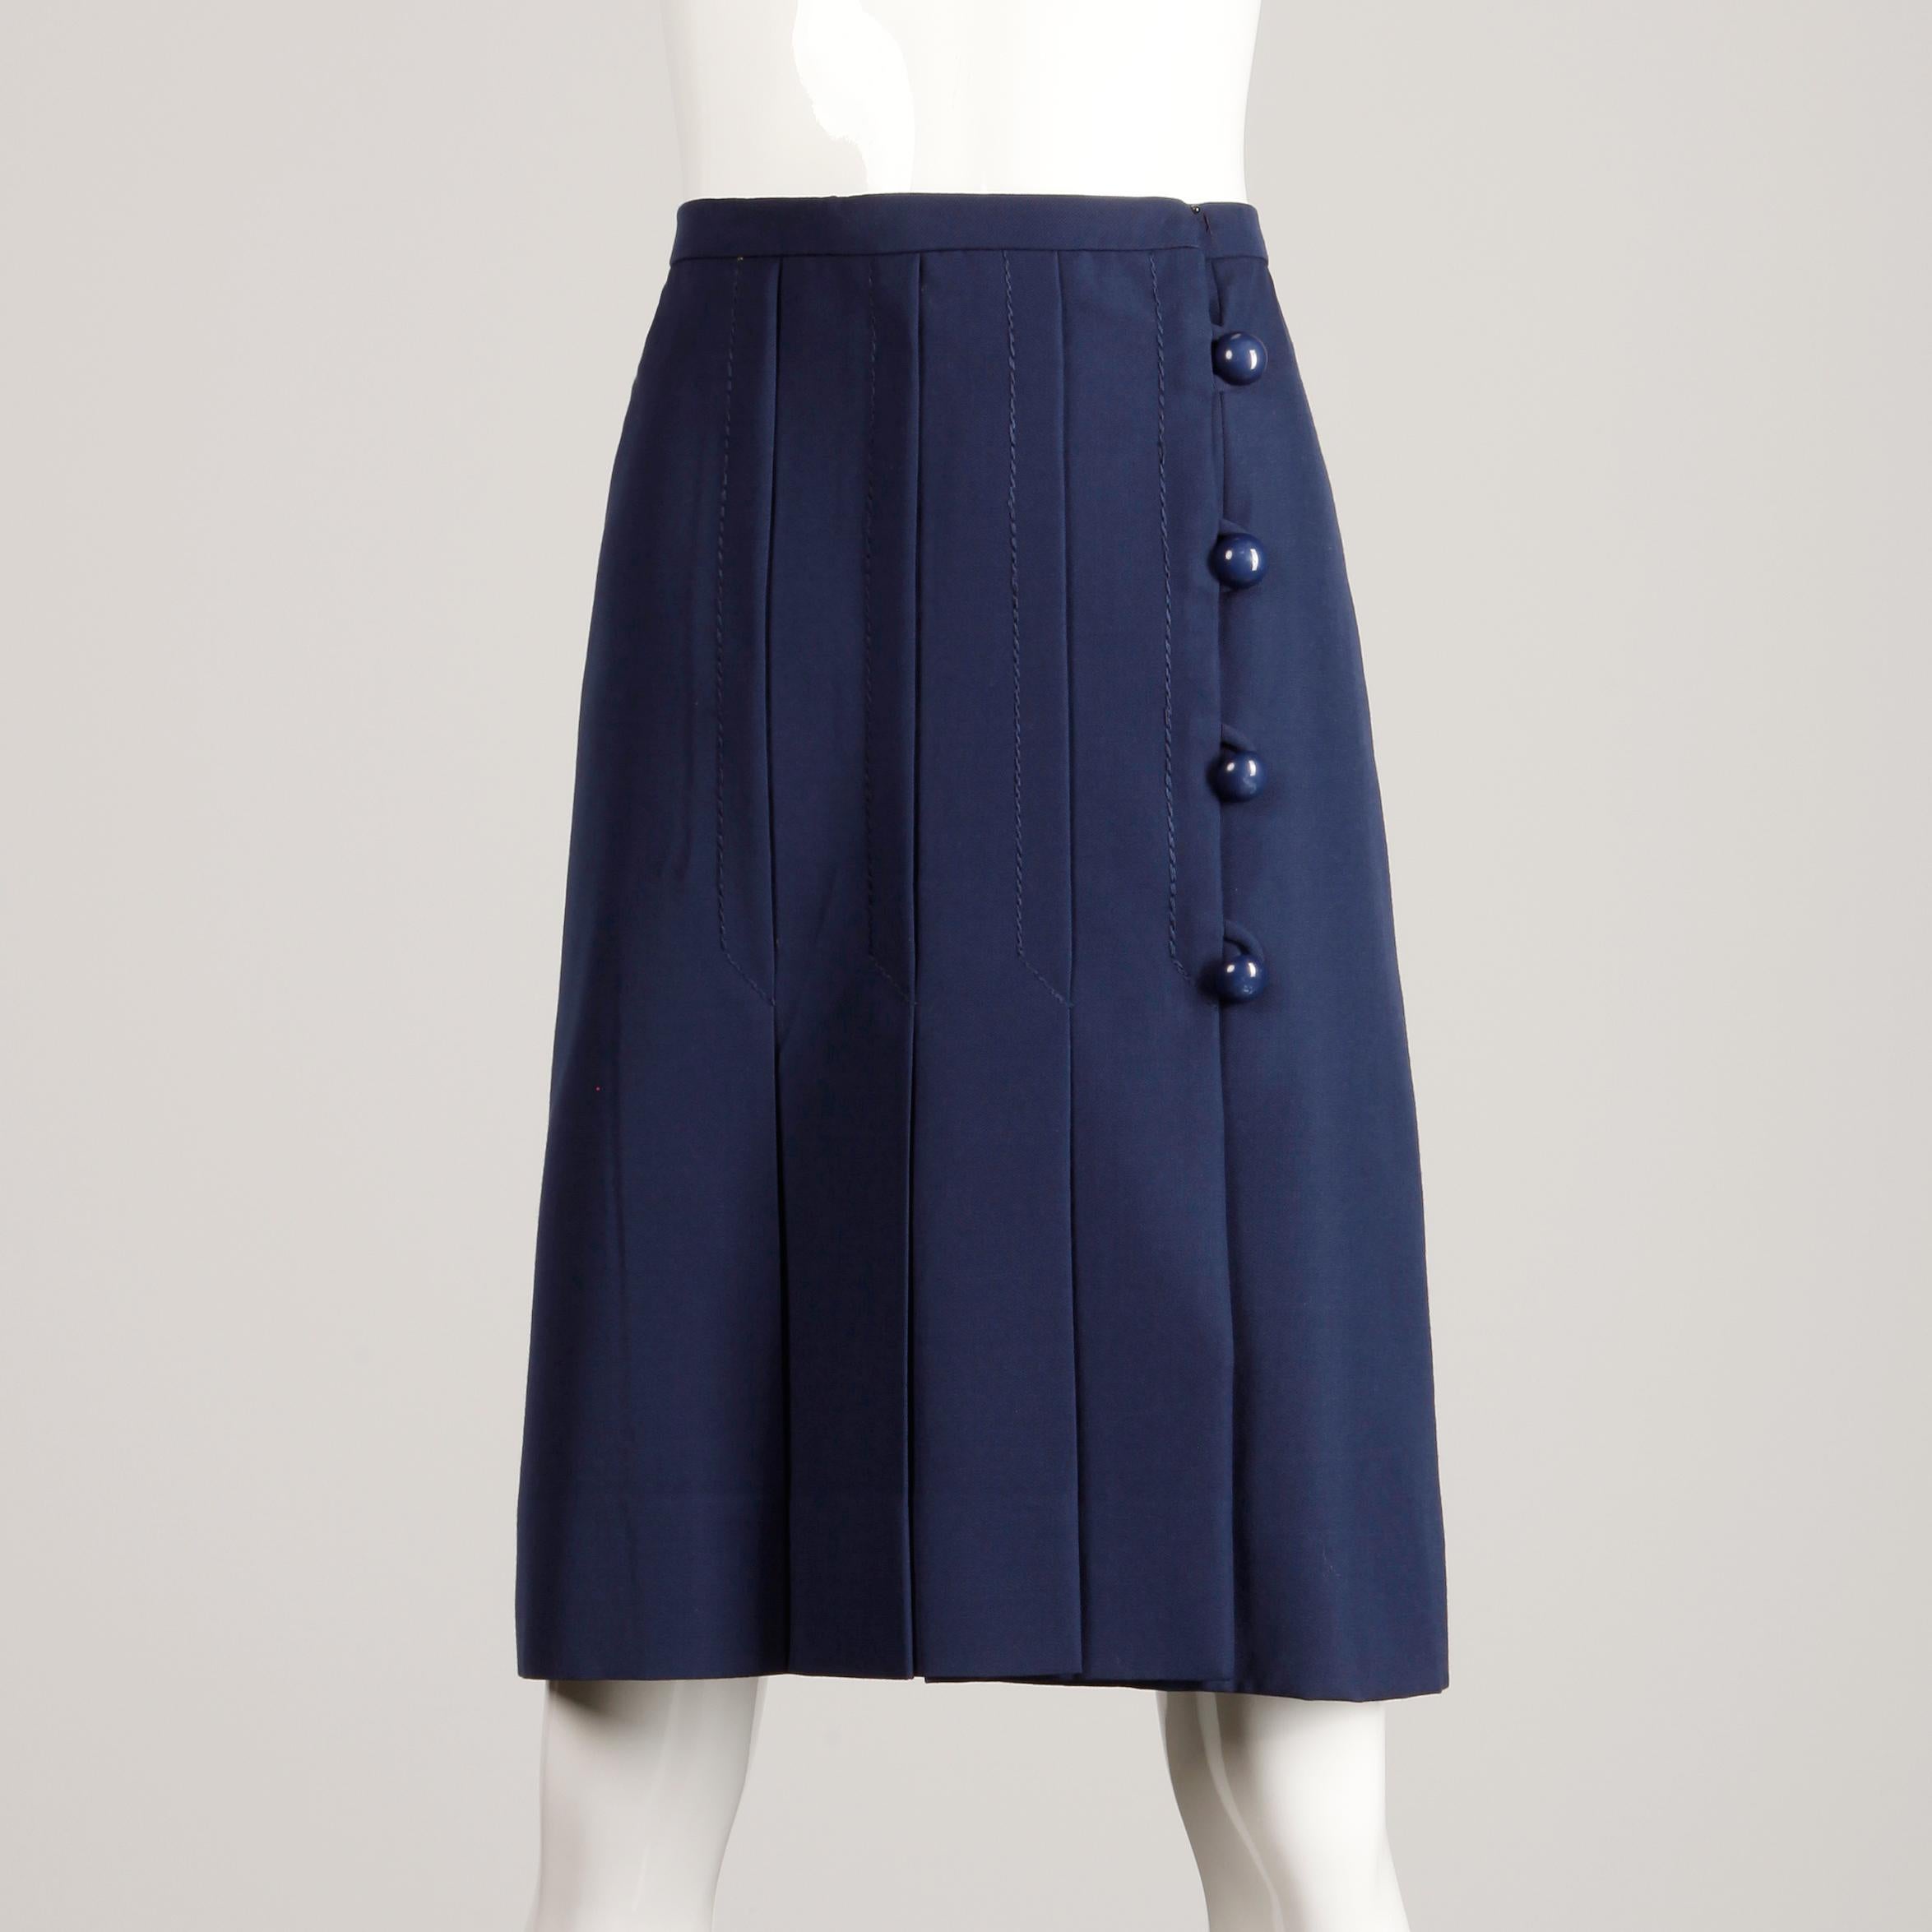 Gorgeous vintage navy blue wool skirt with pleating and asymmetric ball buttons by Jean Patou. Fully lined in silk with front wrap button and hook closure. The marked size is 8, but the skirt fits more like a modern XS-S. The waist measures 23